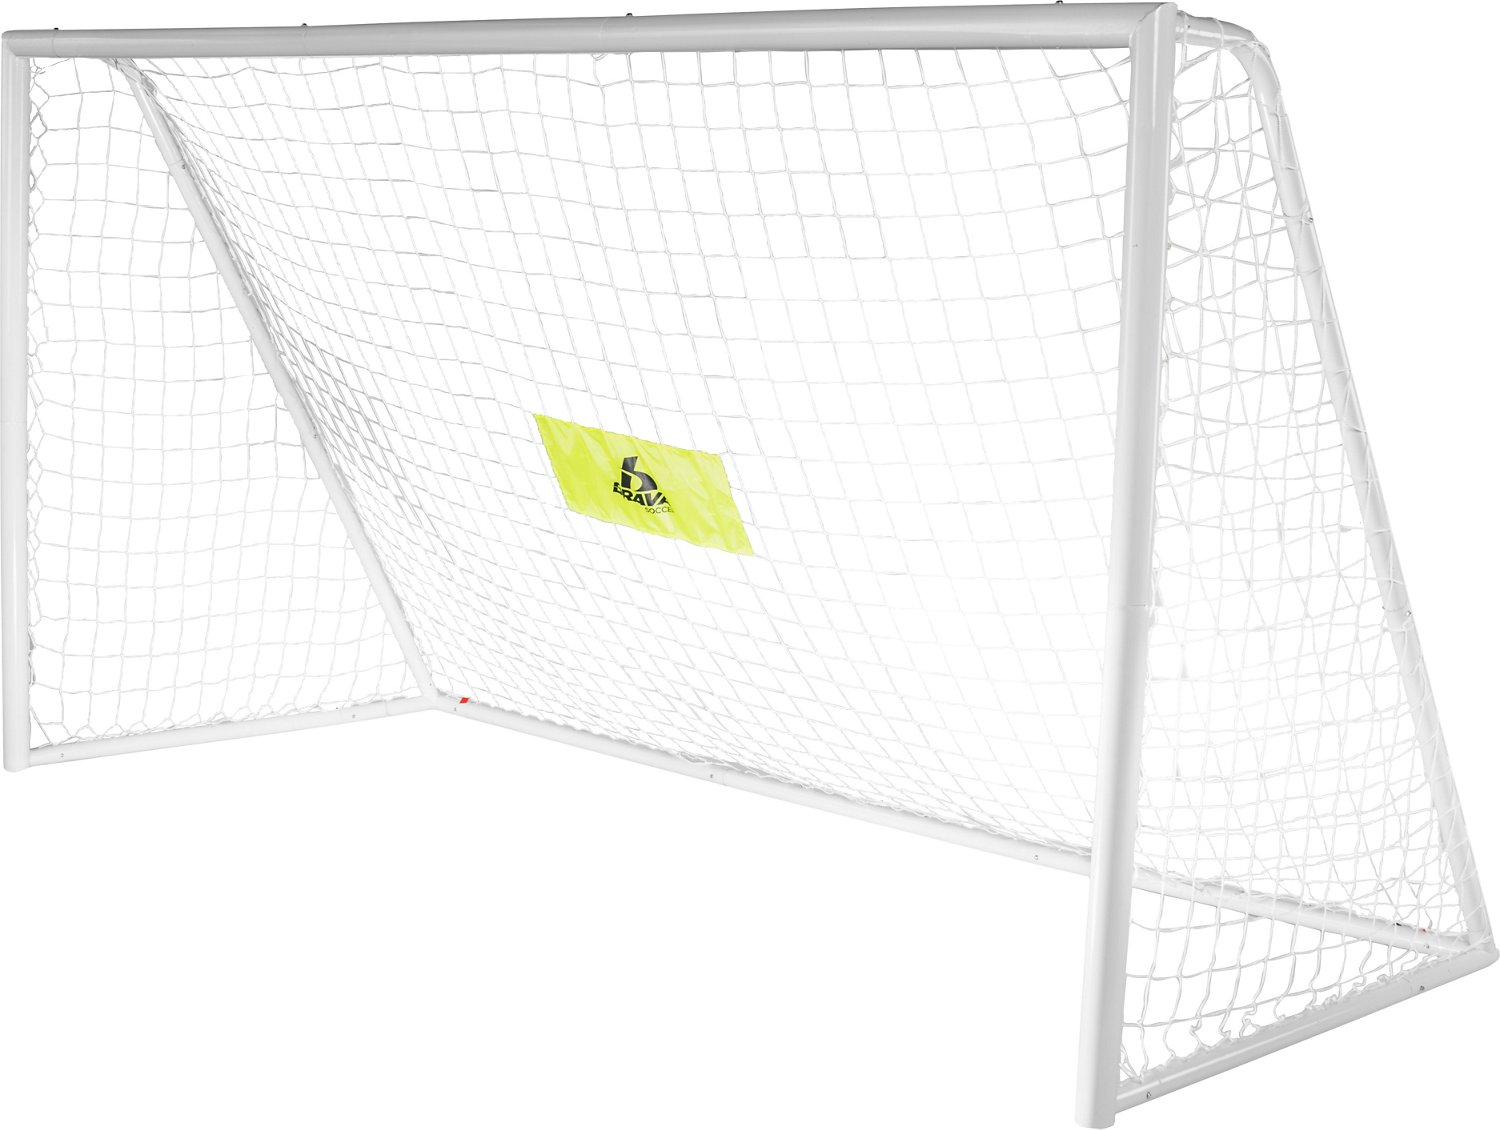 Brava 6.5 ft x 12 ft Tournament Soccer Goal                                                                                      - view number 1 selected